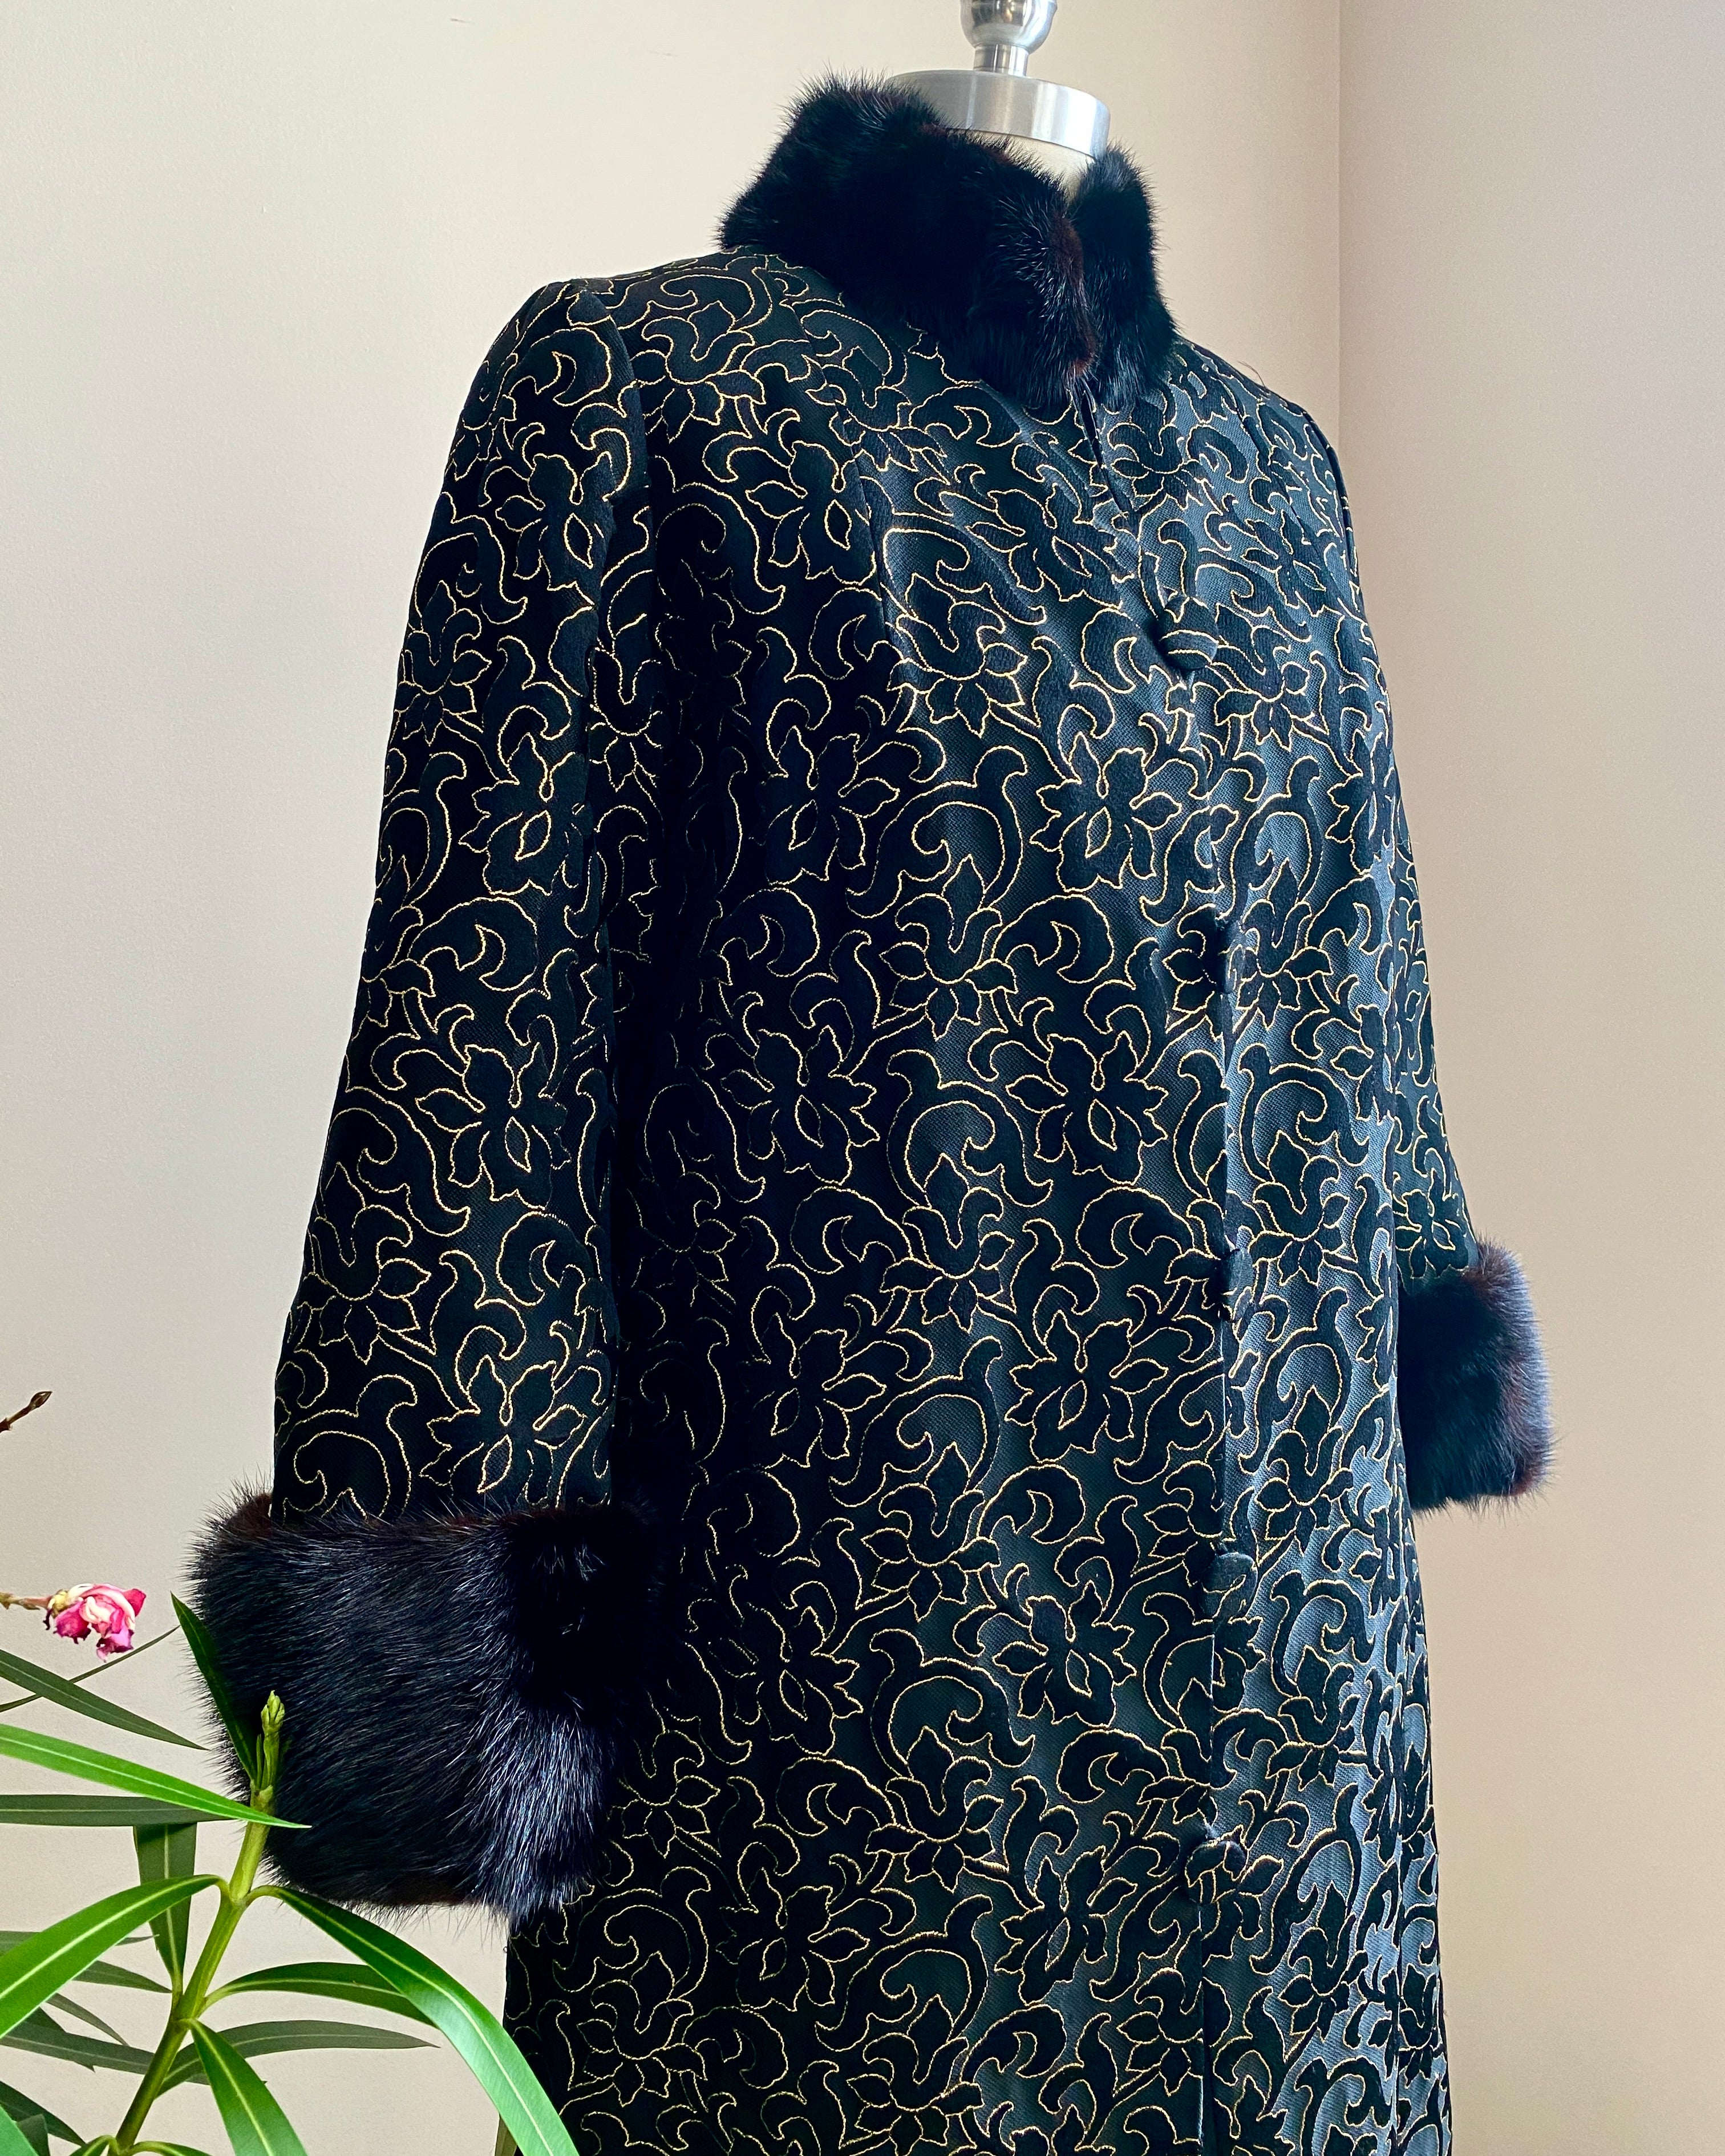 Vintage 1960s Black and Gold Floral Brocade Evening Coat with Mink Fur Trim New Condition S